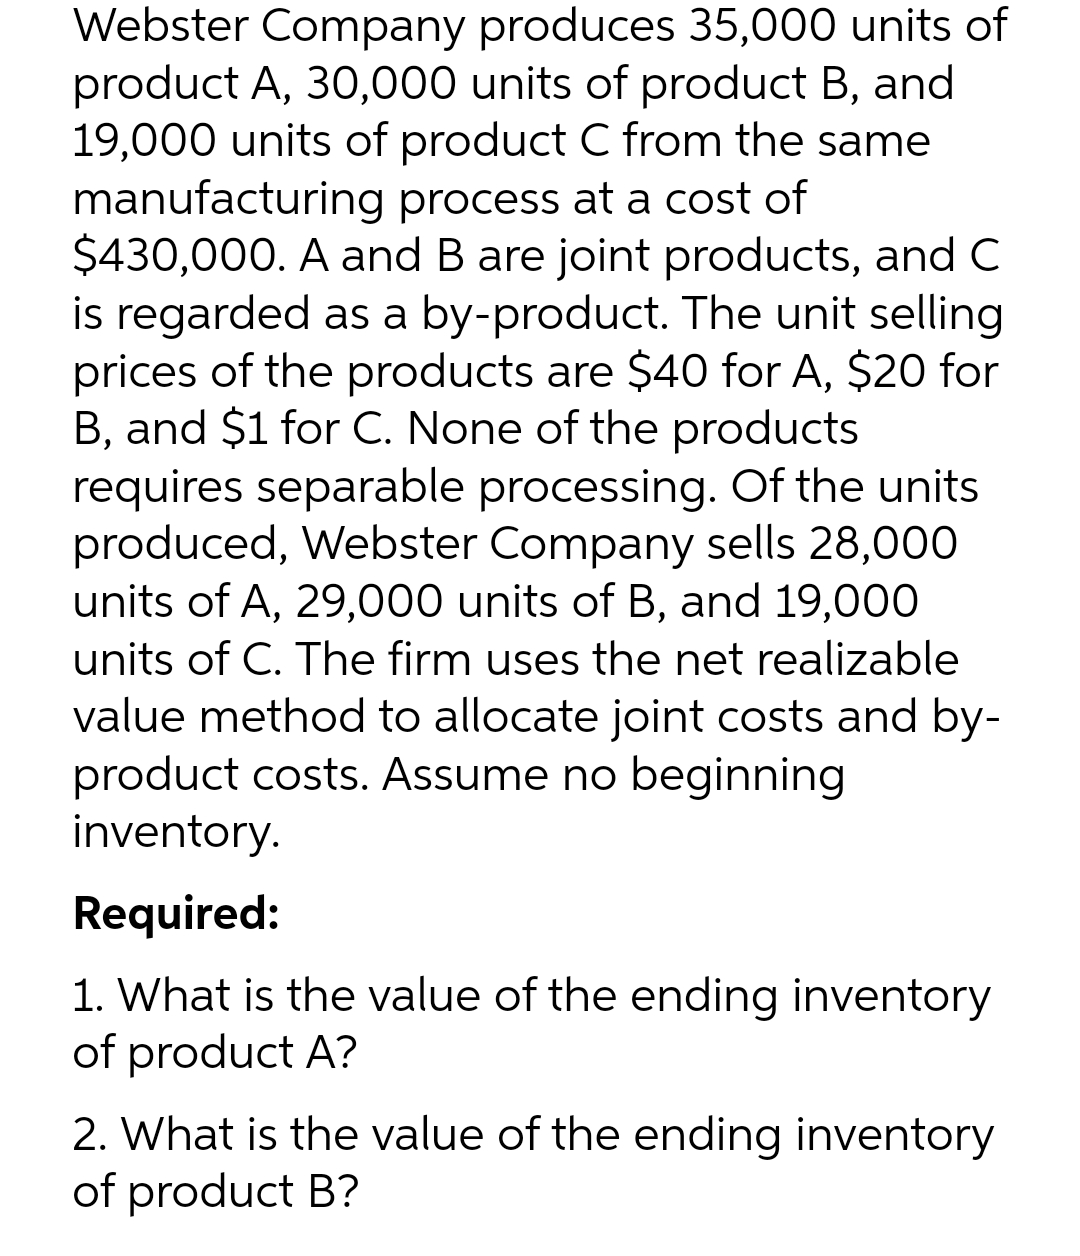 Webster Company produces 35,000 units of
product A, 30,000 units of product B, and
19,000 units of product C from the same
manufacturing process at a cost of
$430,000. A and B are joint products, and C
is regarded as a by-product. The unit selling
prices of the products are $40 for A, $20 for
B, and $1 for C. None of the products
requires separable processing. Of the units
produced, Webster Company sells 28,000
units of A, 29,000 units of B, and 19,000
units of C. The firm uses the net realizable
value method to allocate joint costs and by-
product costs. Assume no beginning
inventory.
Required:
1. What is the value of the ending inventory
of product A?
2. What is the value of the ending inventory
of product B?